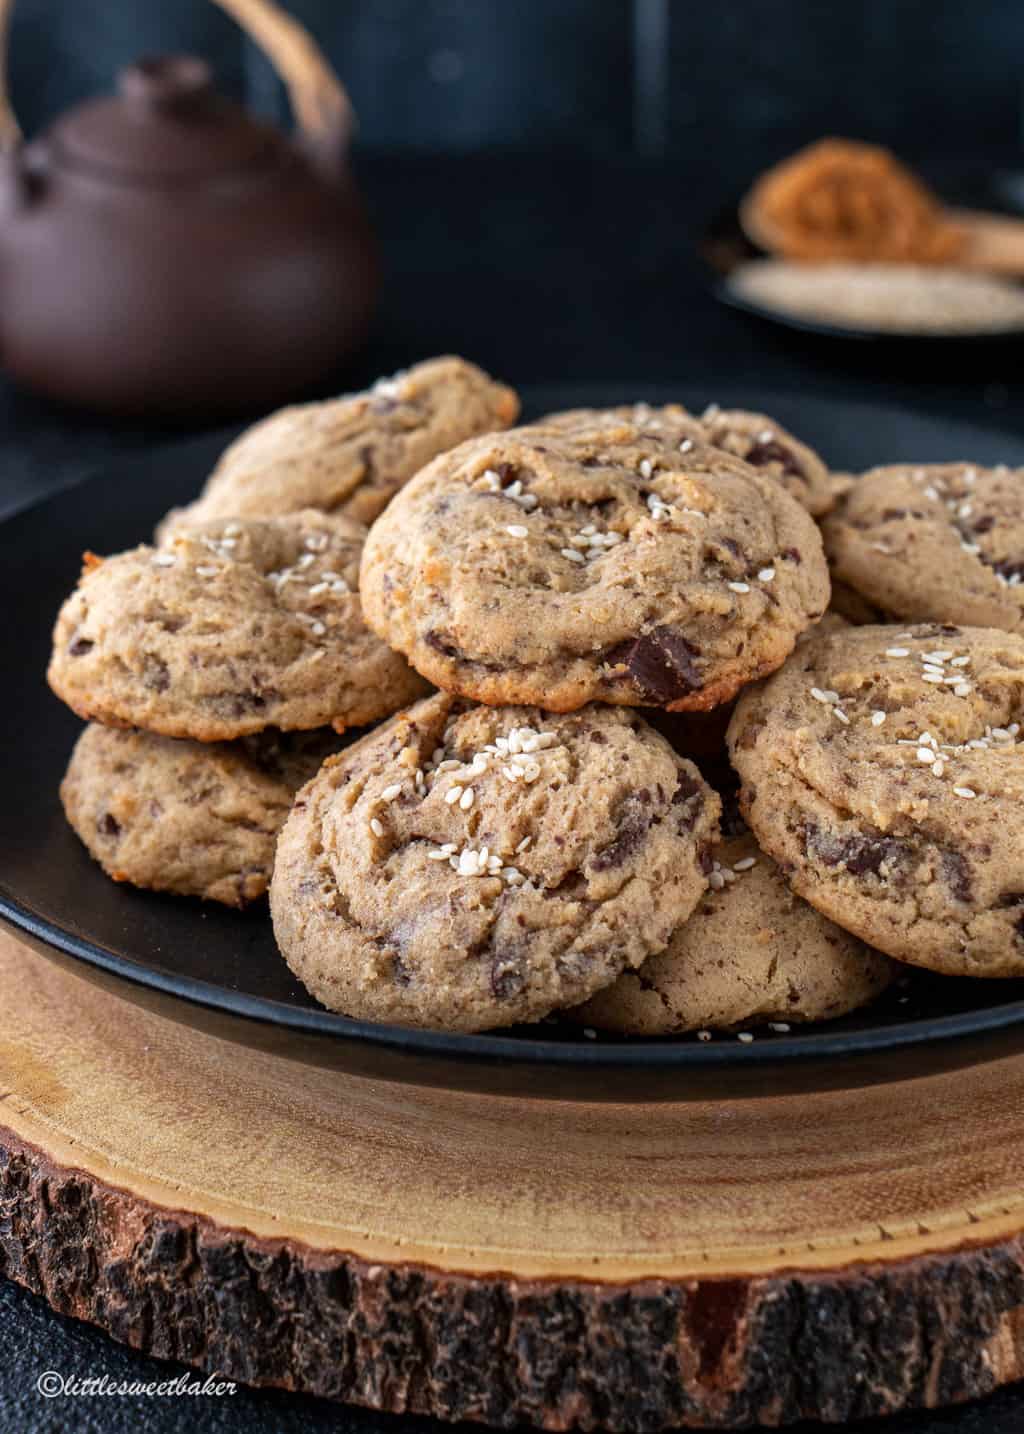 A plate of miso chocolate chip cookies on a wooden board.